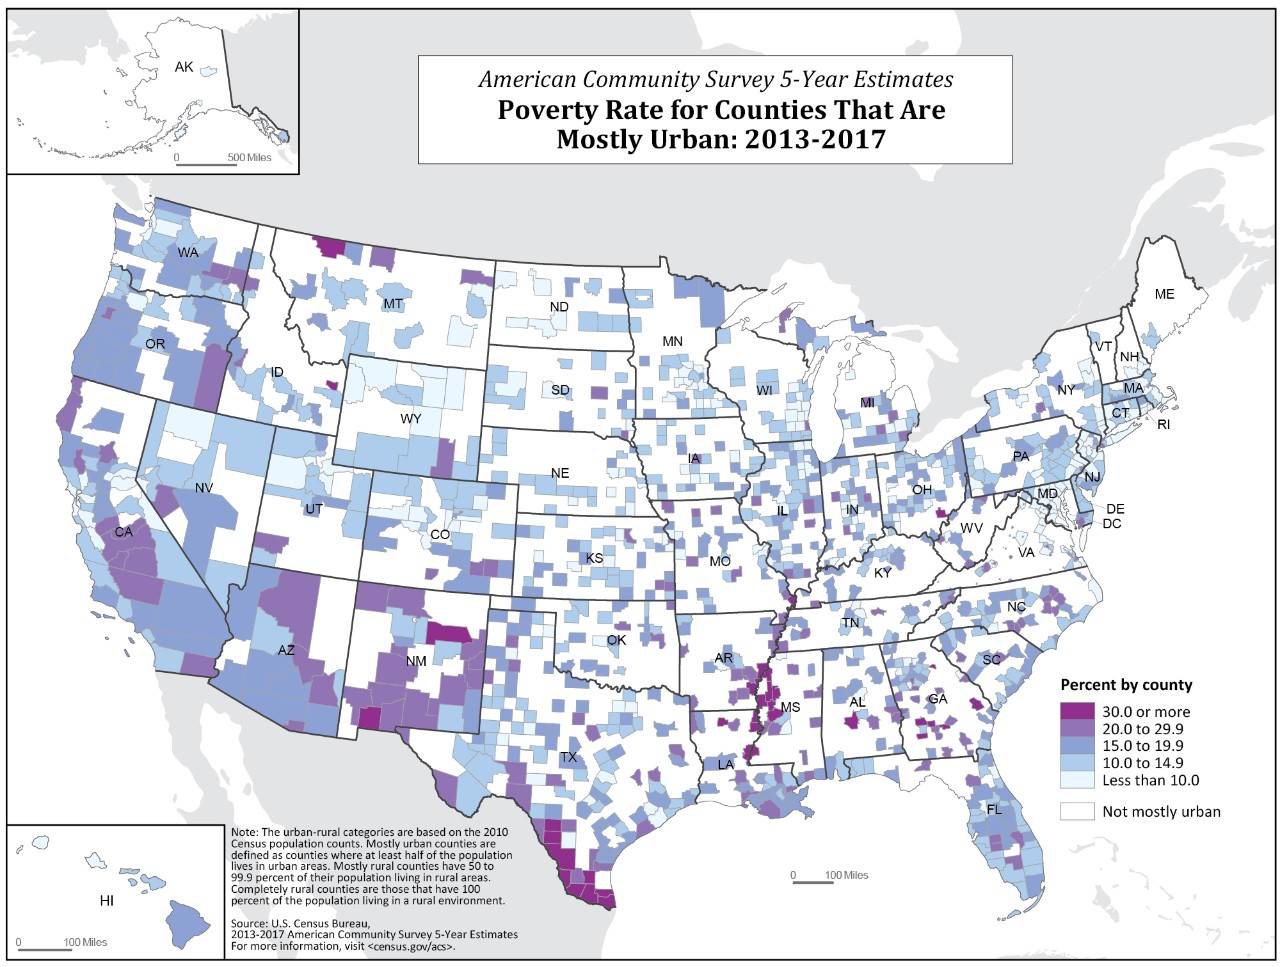 Poverty Rate for Counties That Are Mostly Urban: 2013-2017